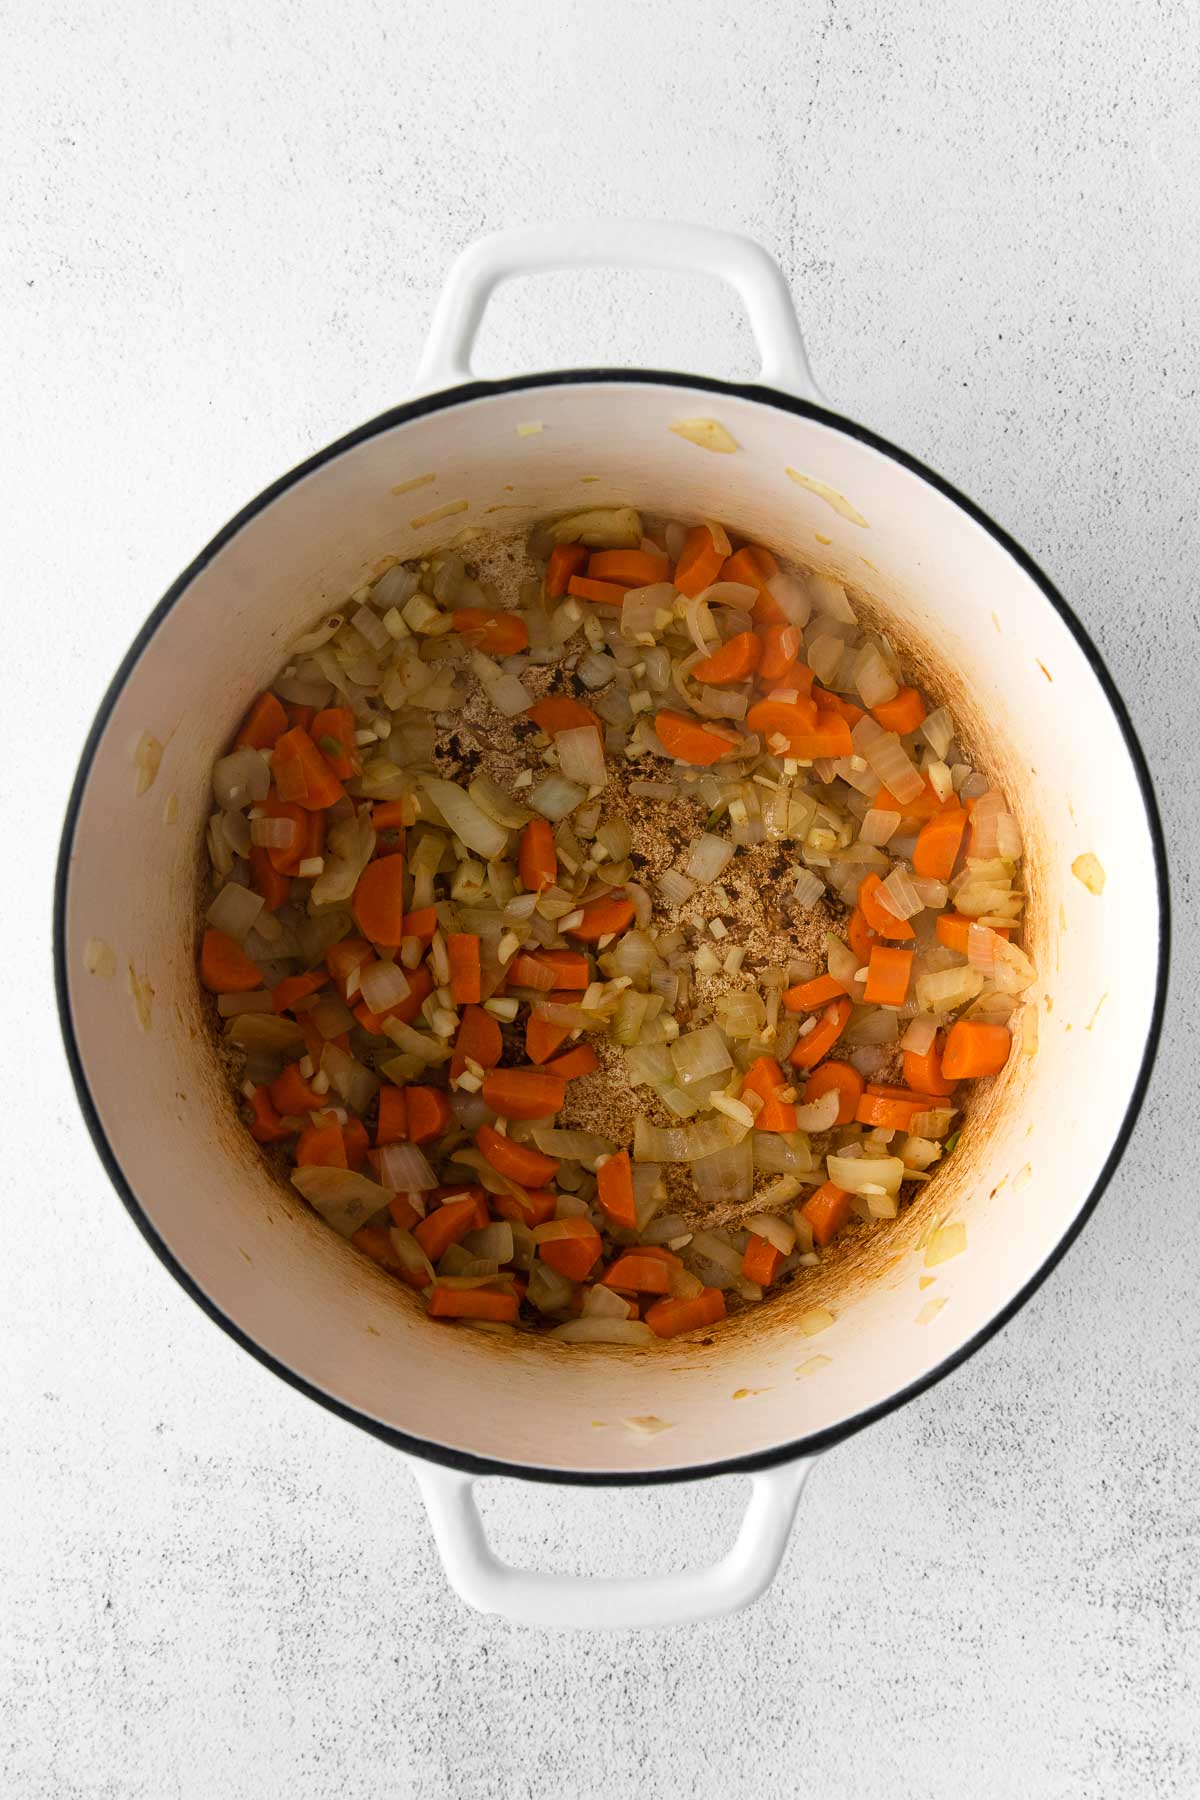 diced carrots, celery and onions sautéing in a white pot